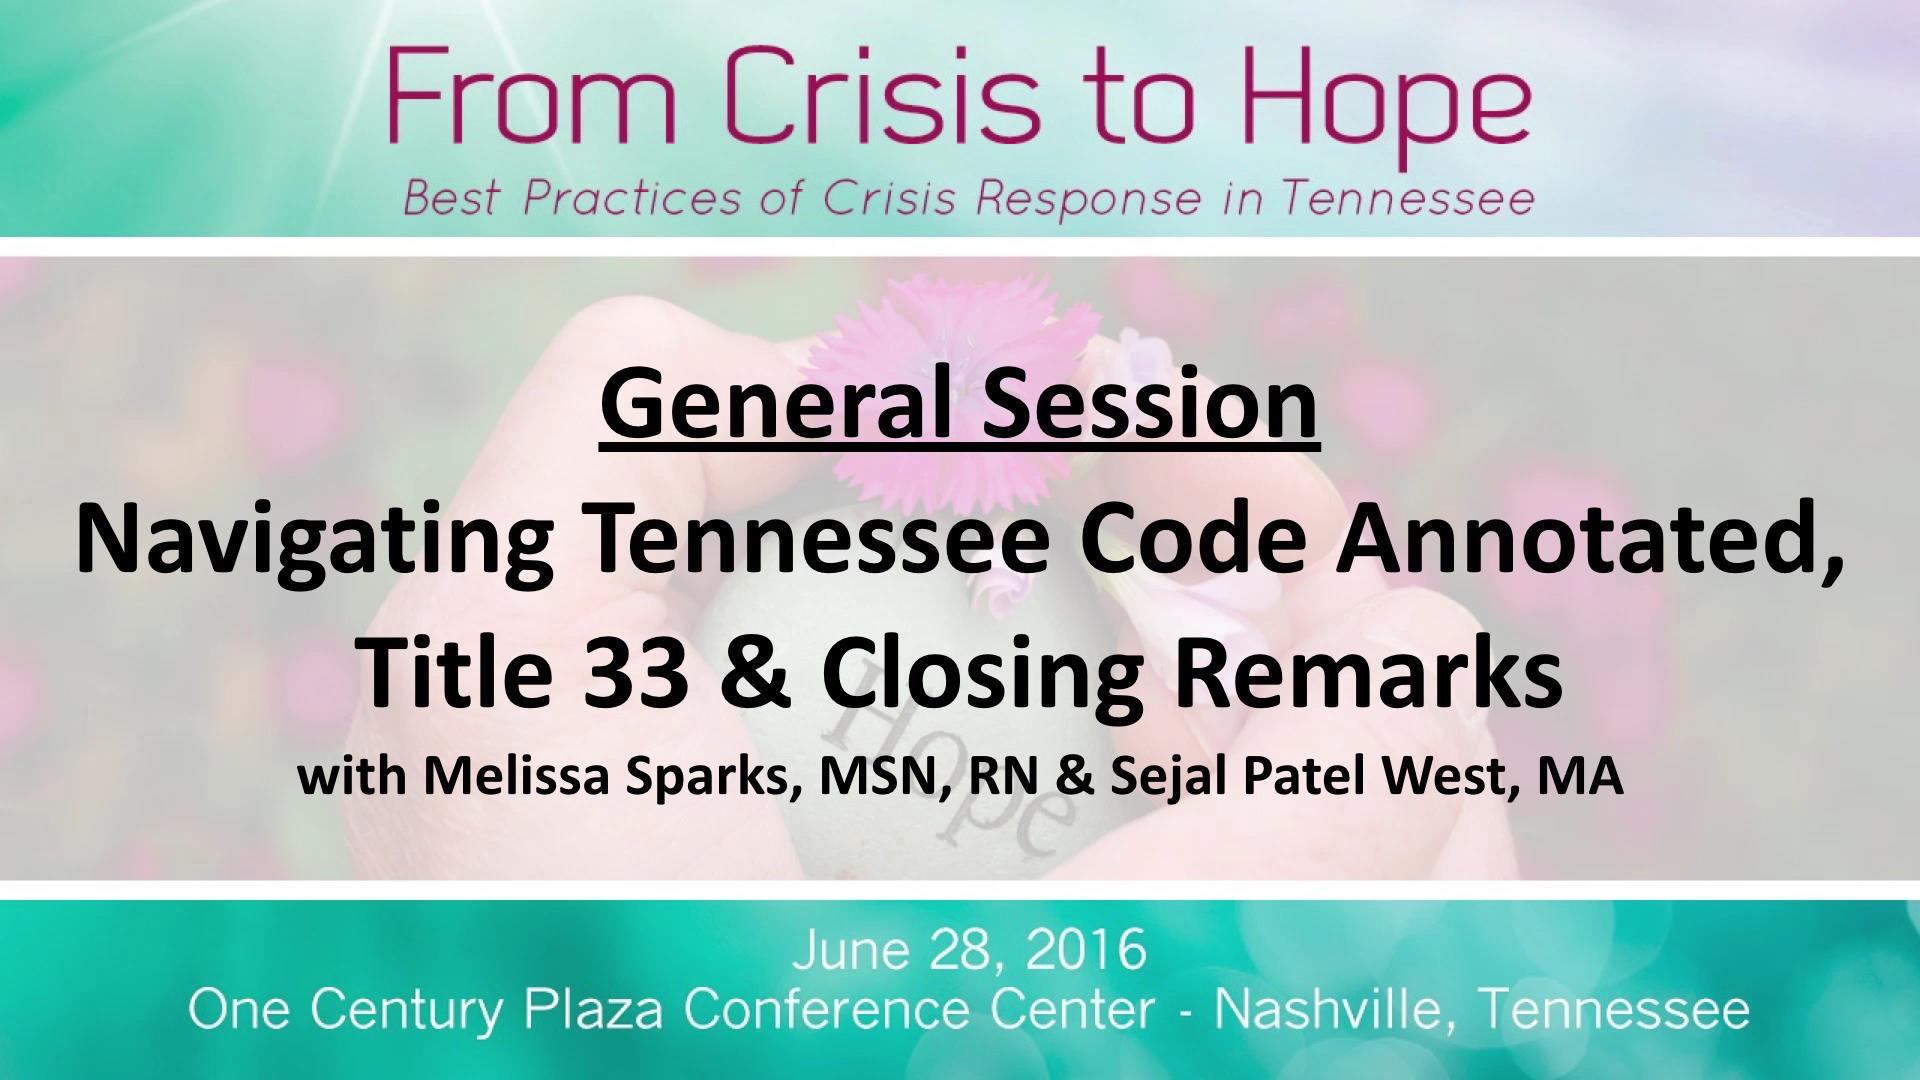 Navigating Tennessee Code Annotated, Title 33 & Closing Remarks